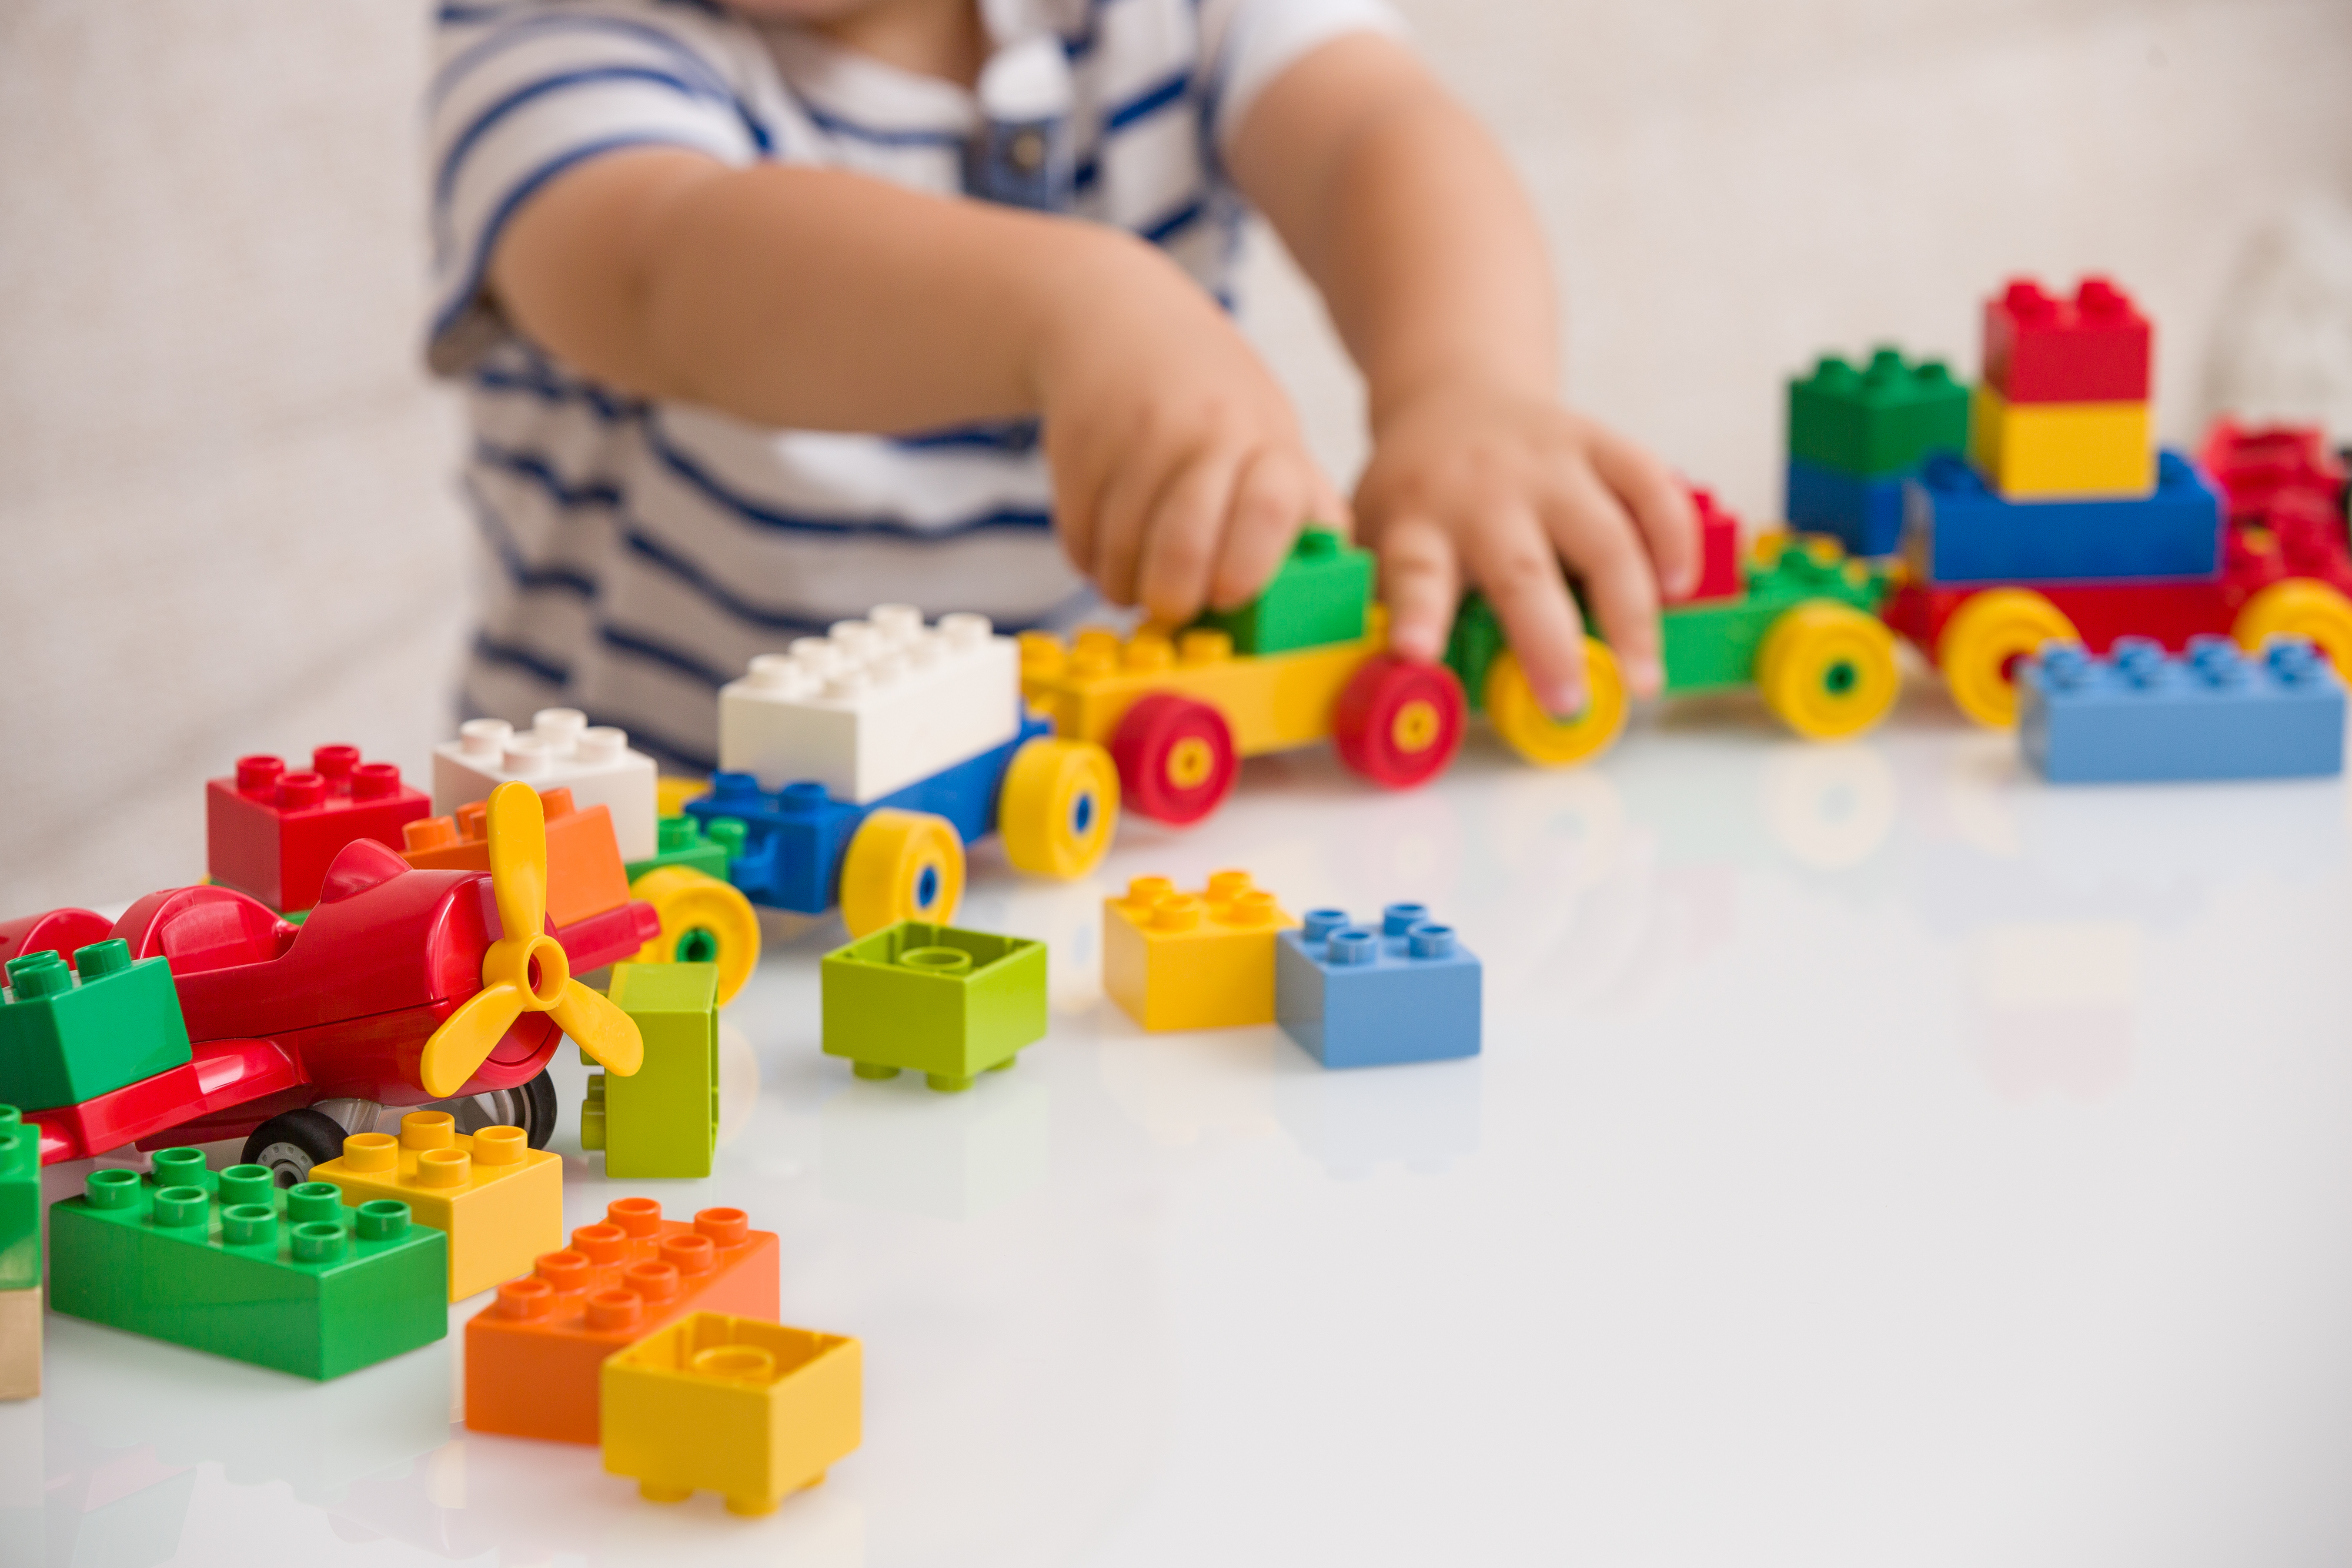 Child playing with a variety of plastic building blocks on a table